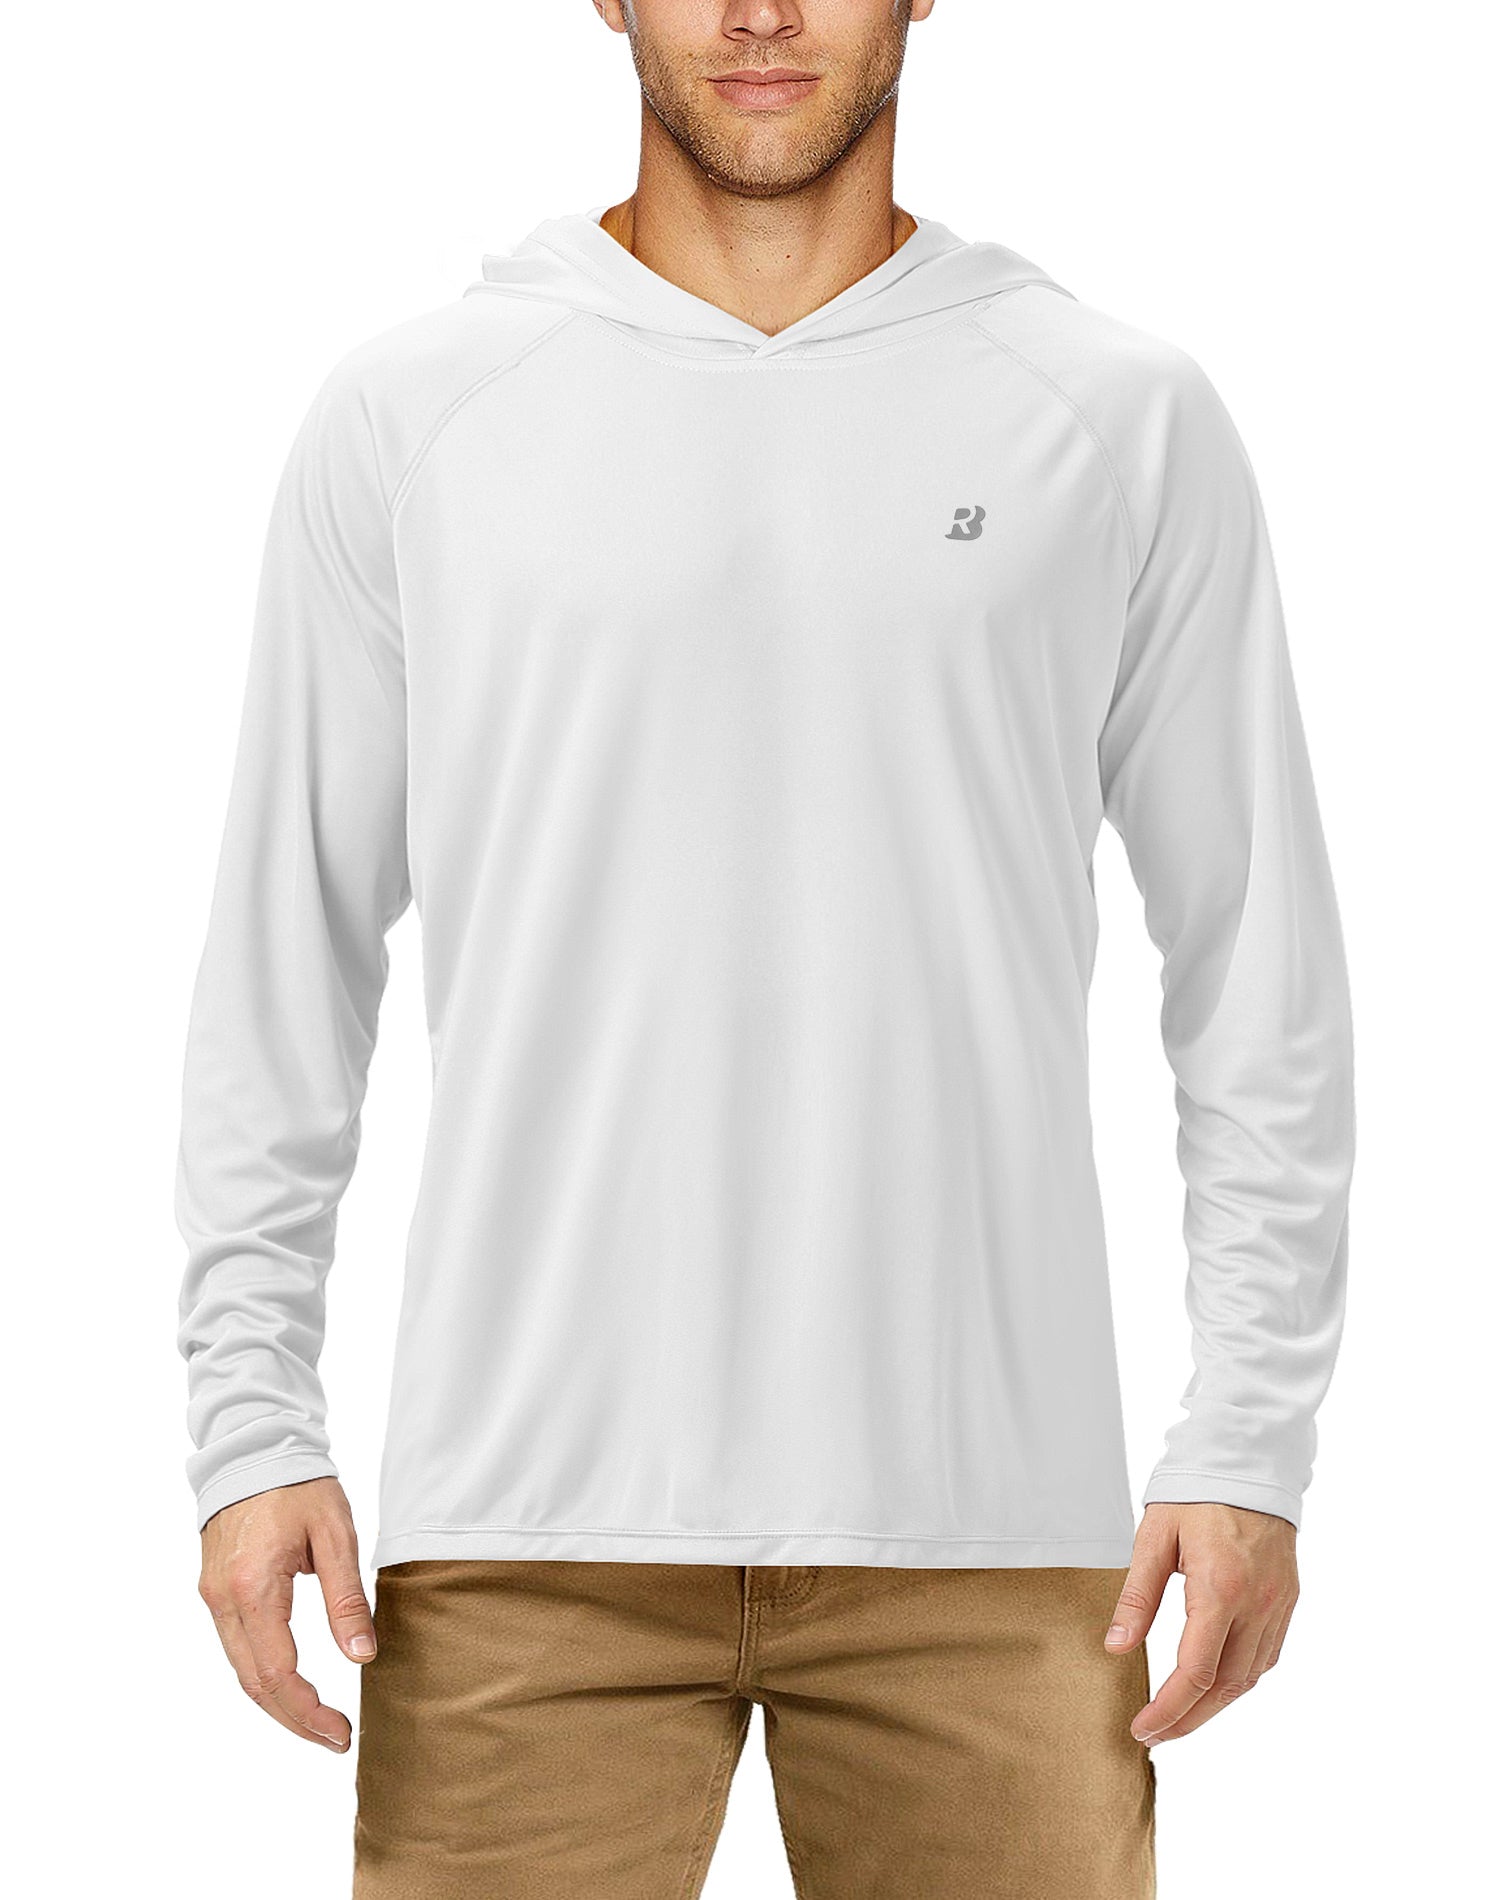 Under armour Long Sleeve Fishing Shirts & Tops for sale